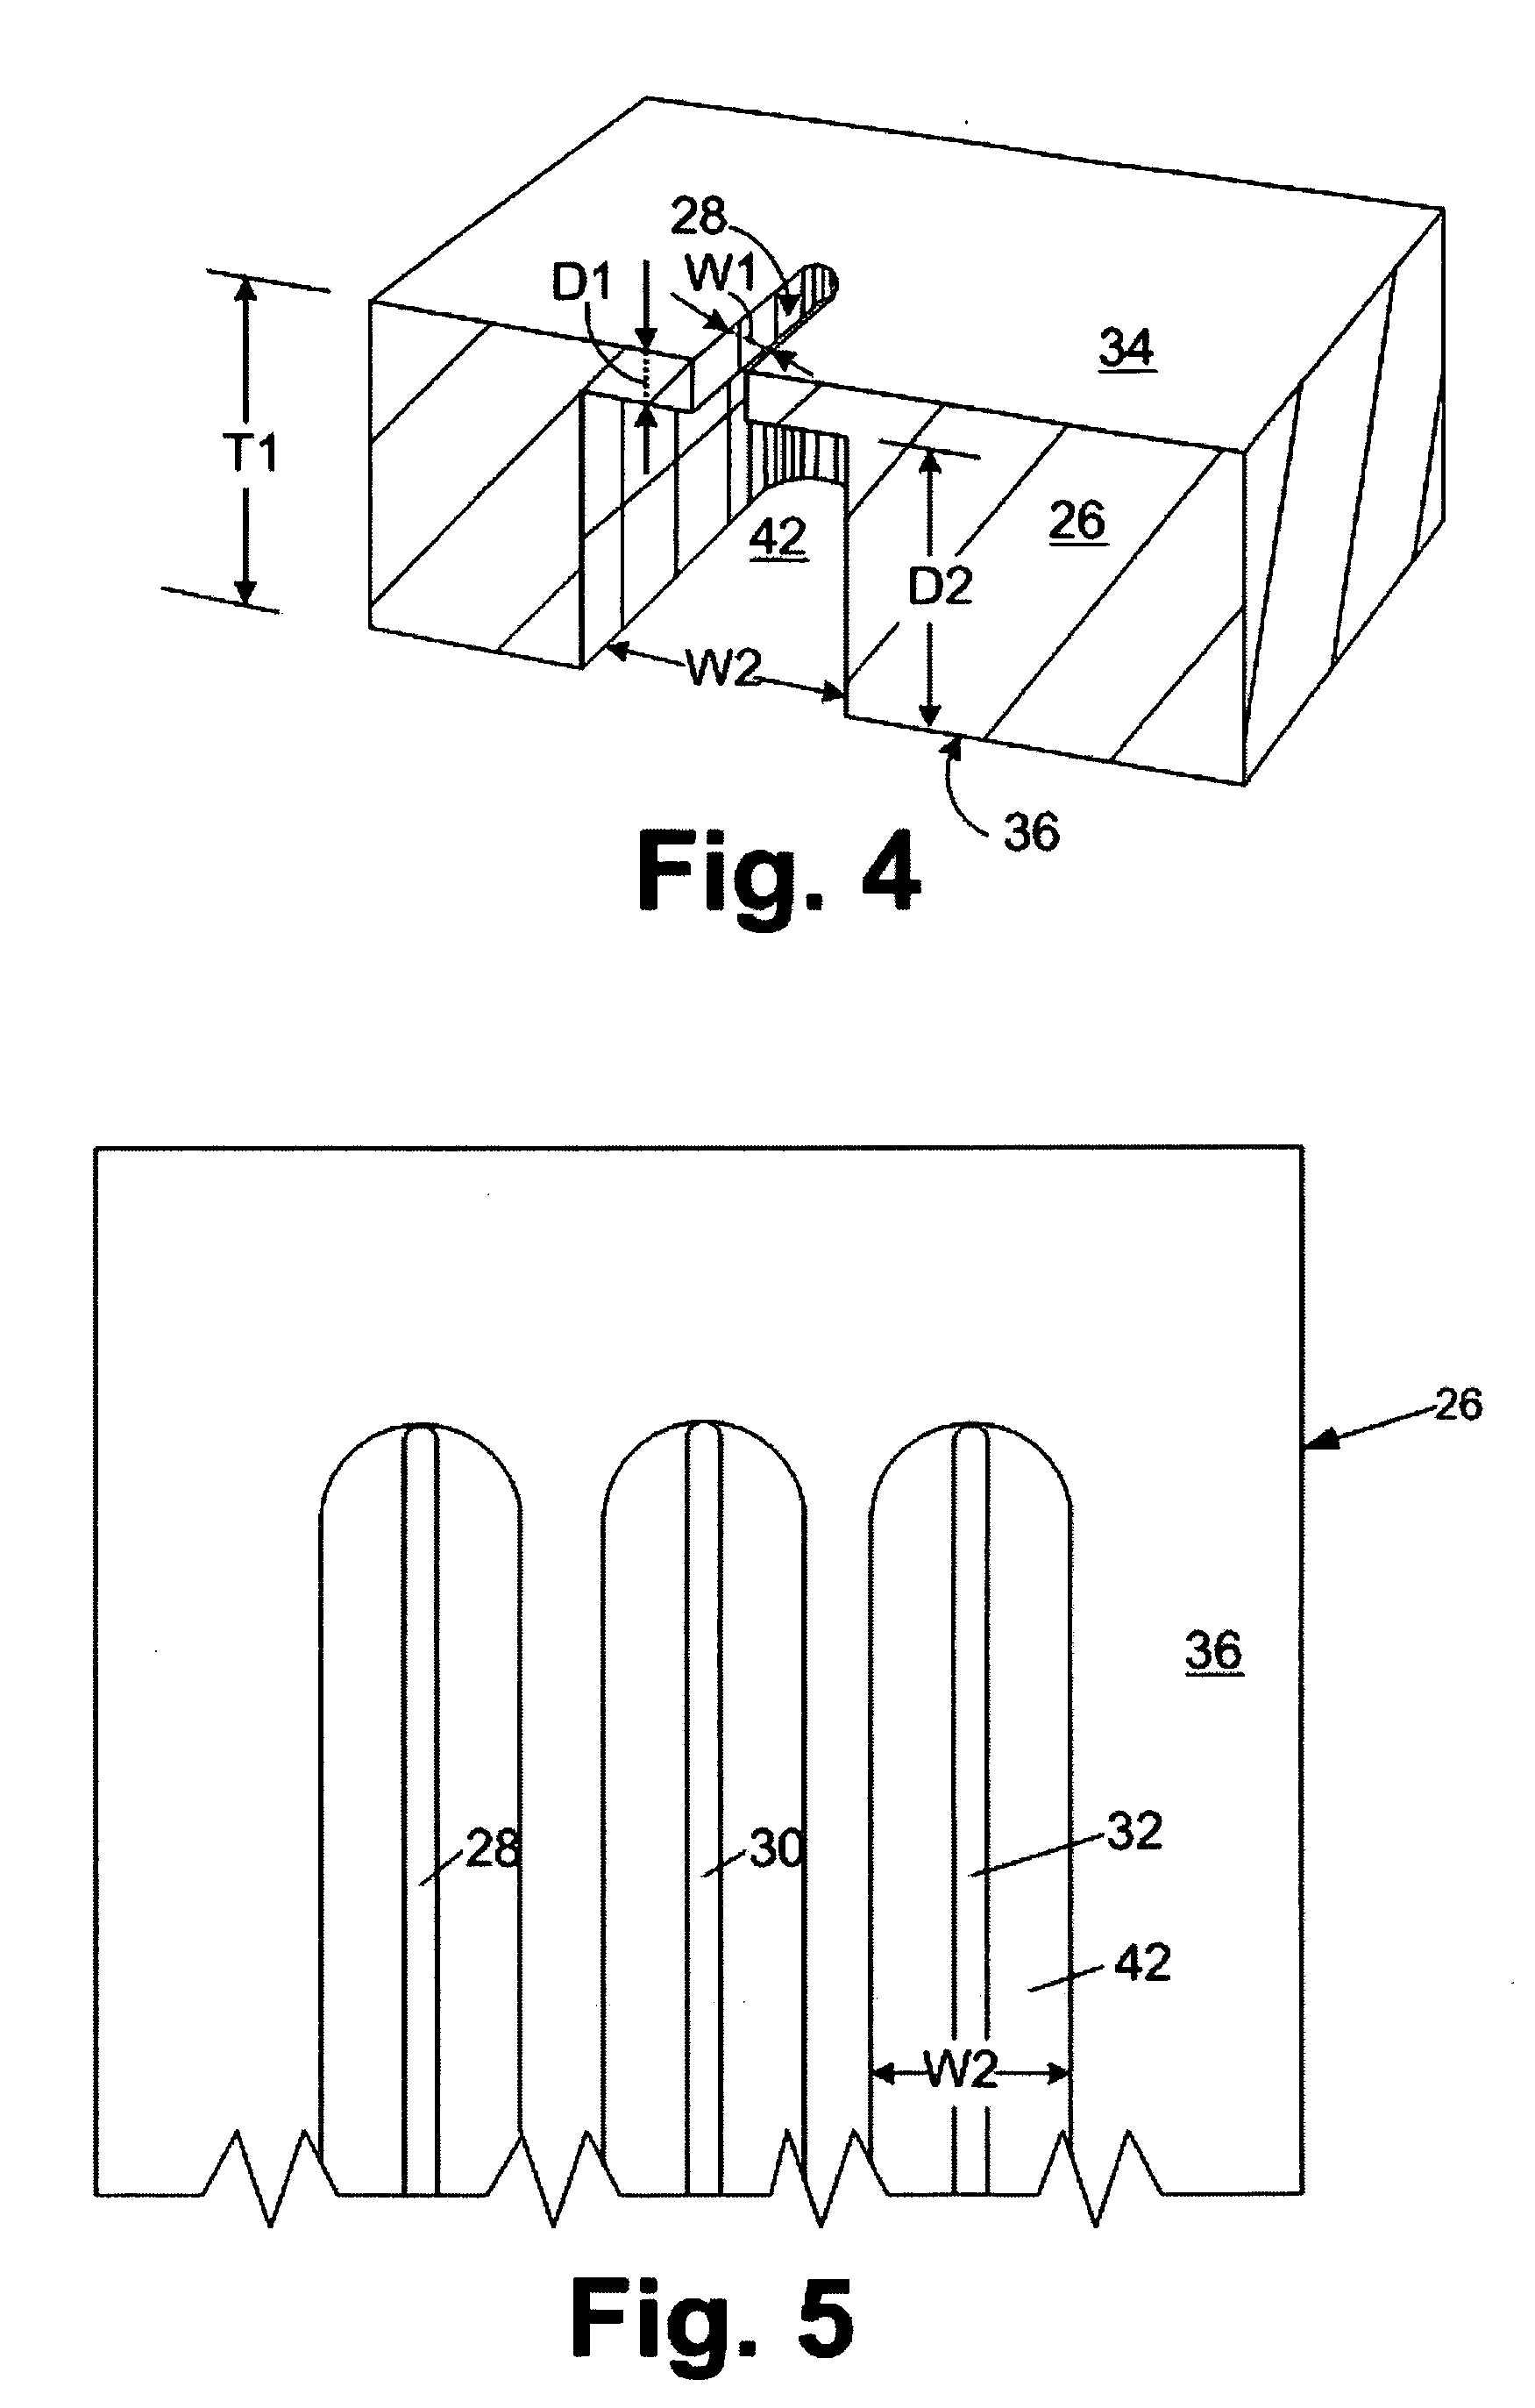 Microfluidic substrates having improved fluidic channels